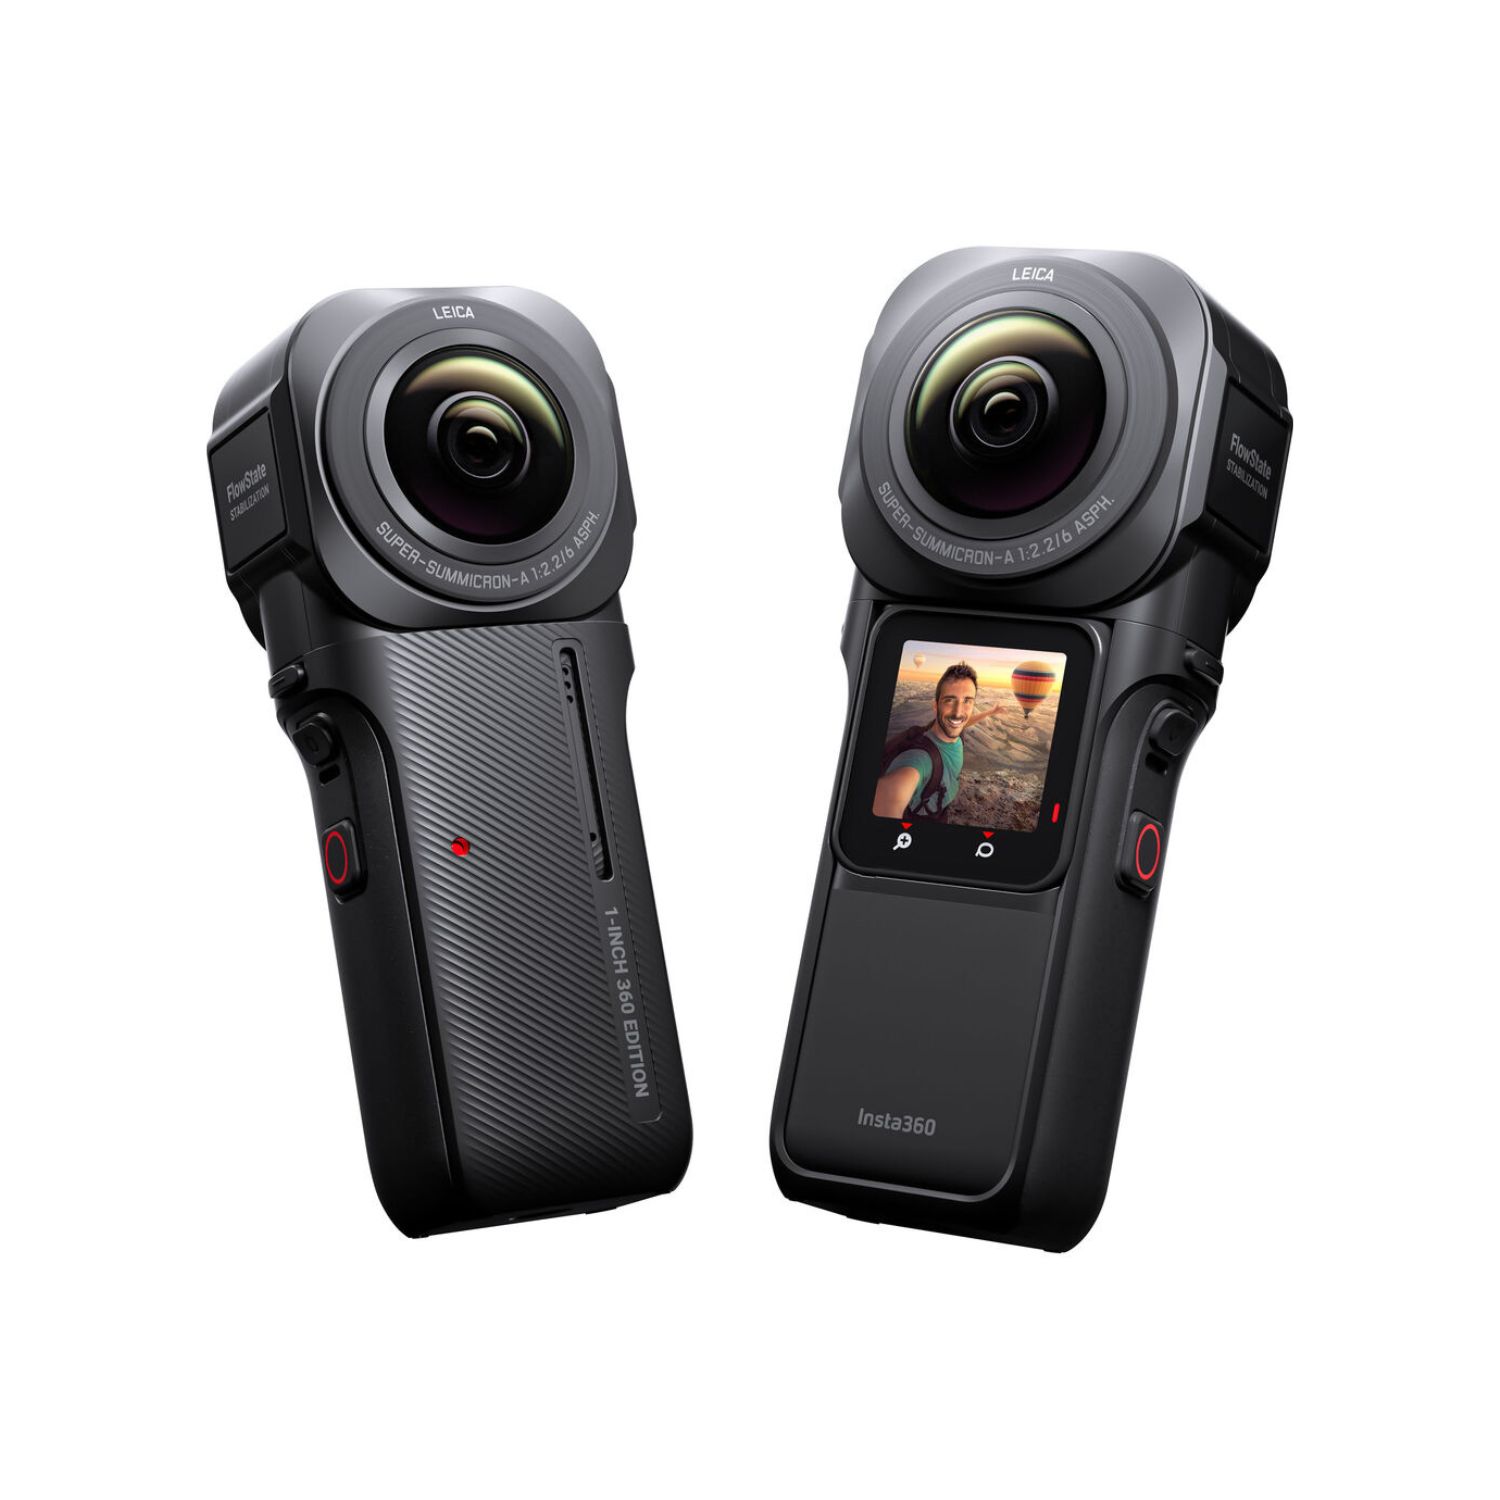 9 Reason Insta360 is Better Than GoPro